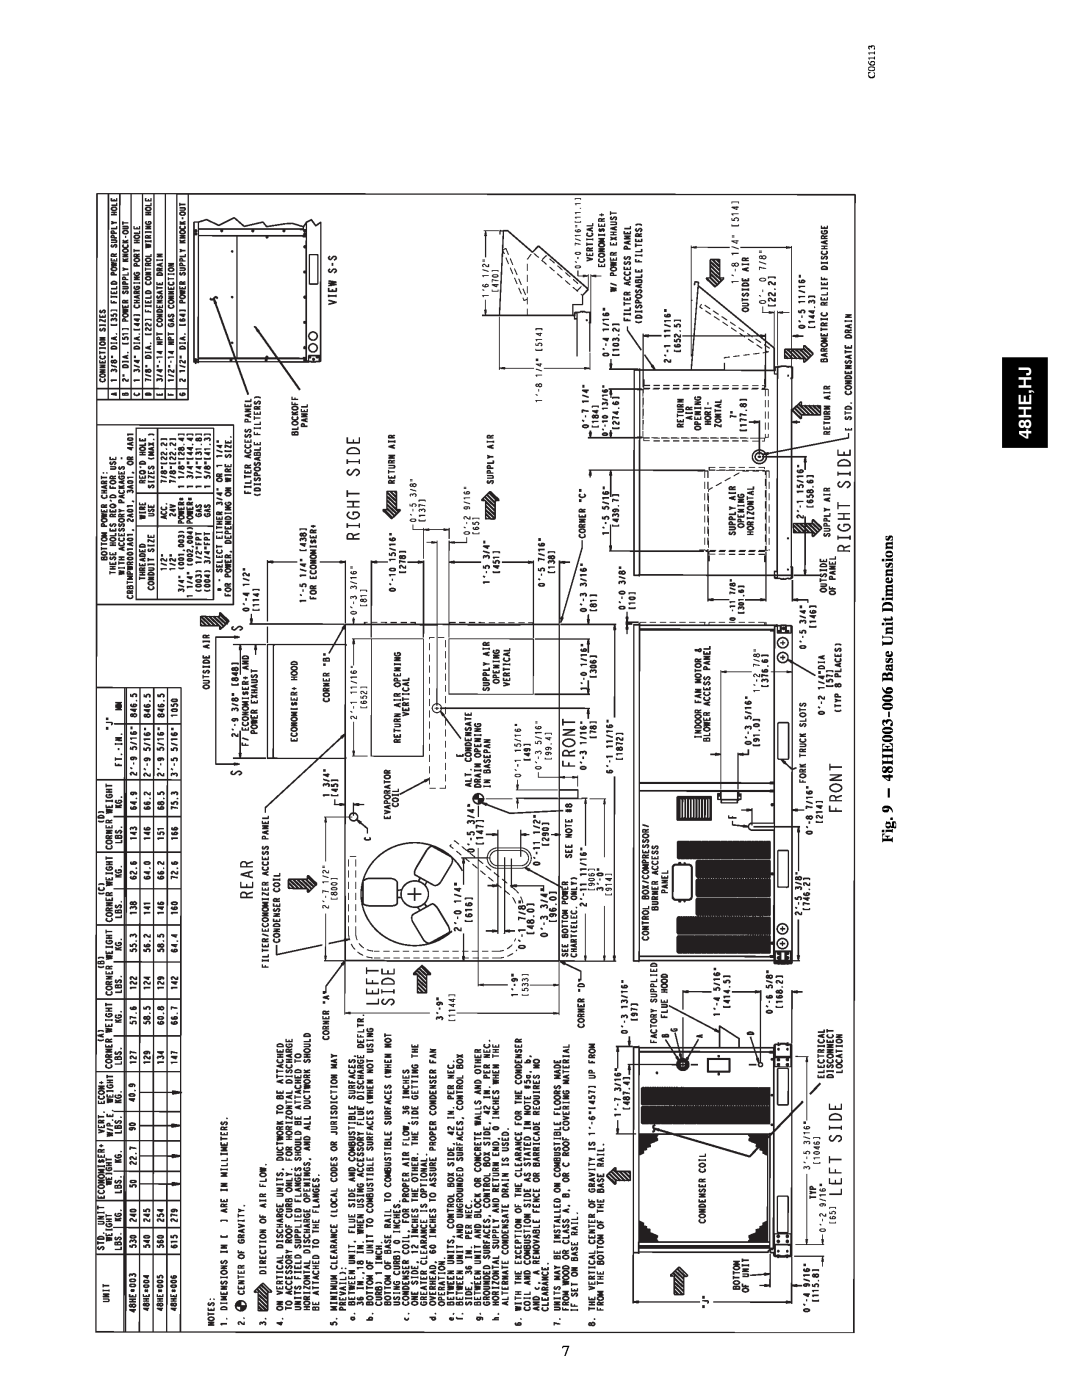 Carrier 48HJ004---007, 48HE003---006 installation instructions 48HE,HJ, 48HE003-006Base Unit Dimensions, C06113 